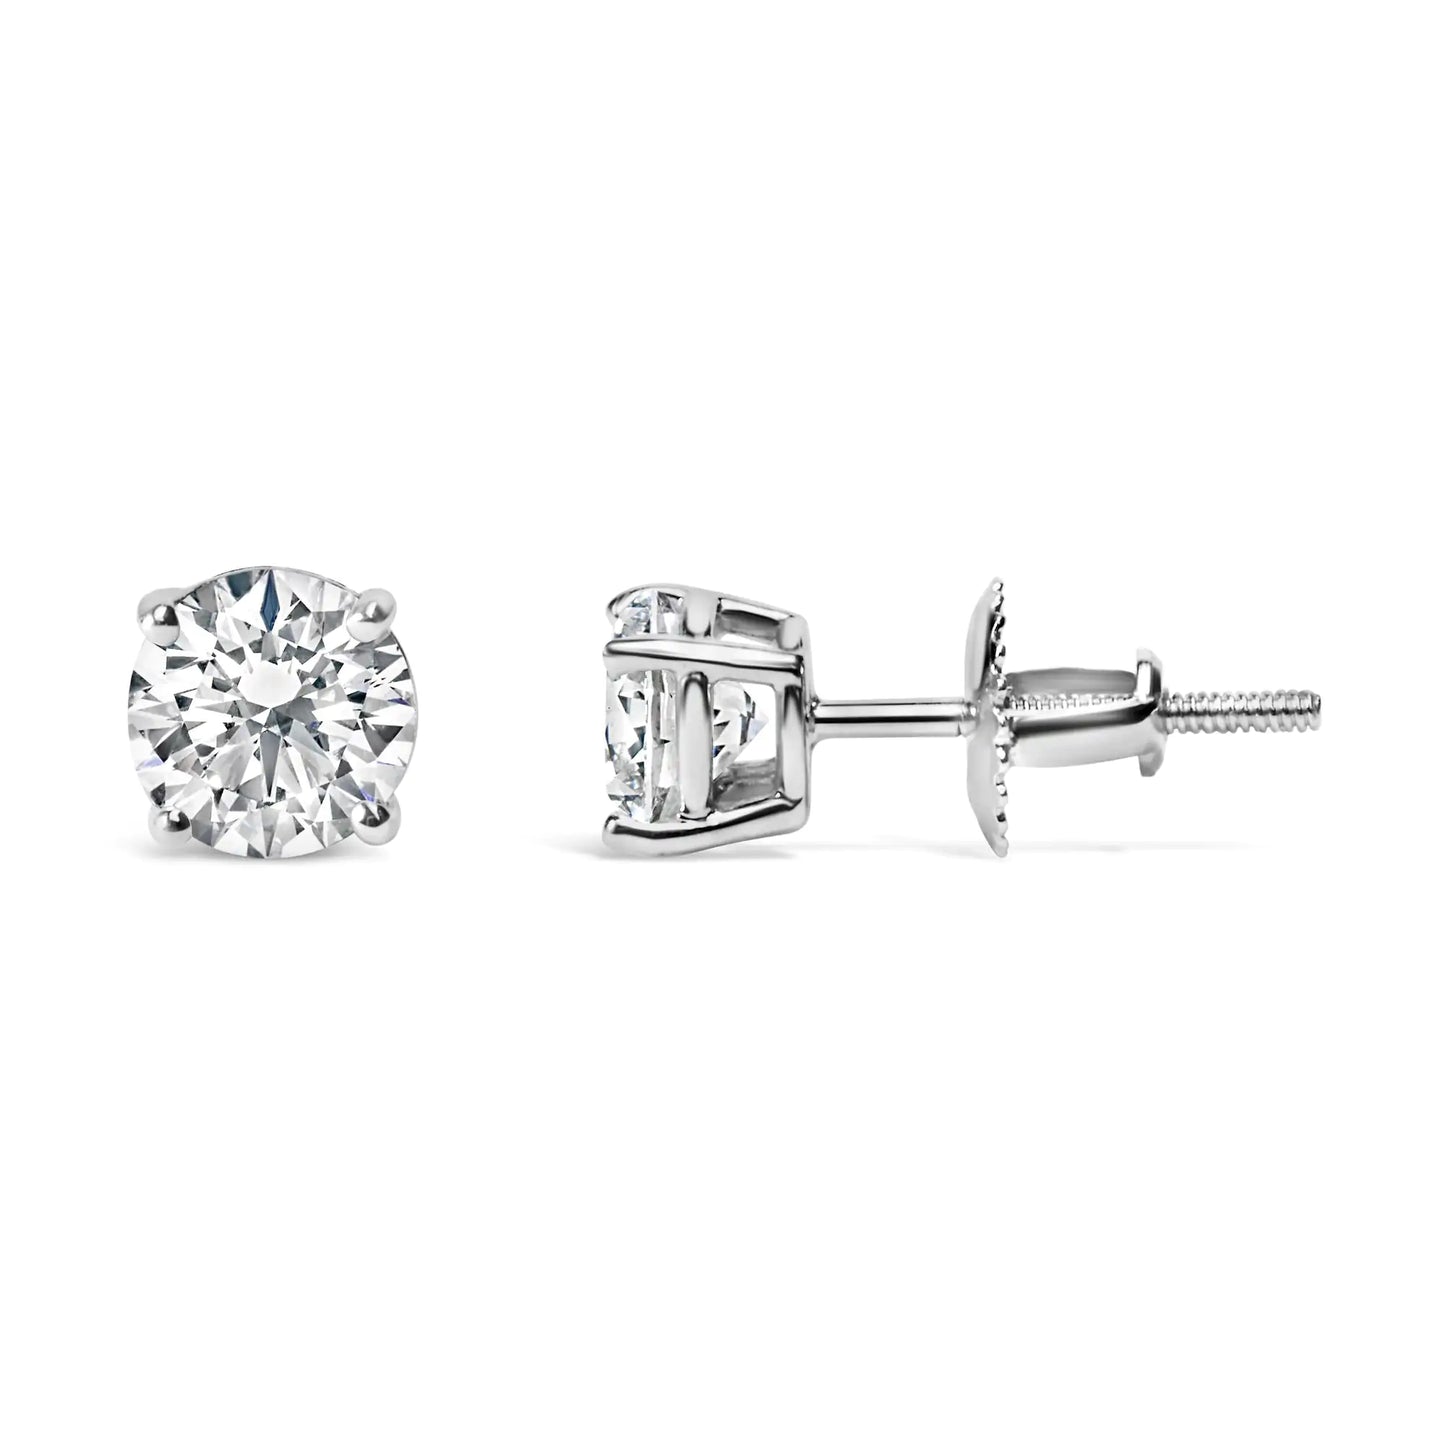 Classic Solitaire stud earrings made of 14-carat round diamond-cut gold weighing 1.0 carats with a lab-grown white diamond with 4 prongs